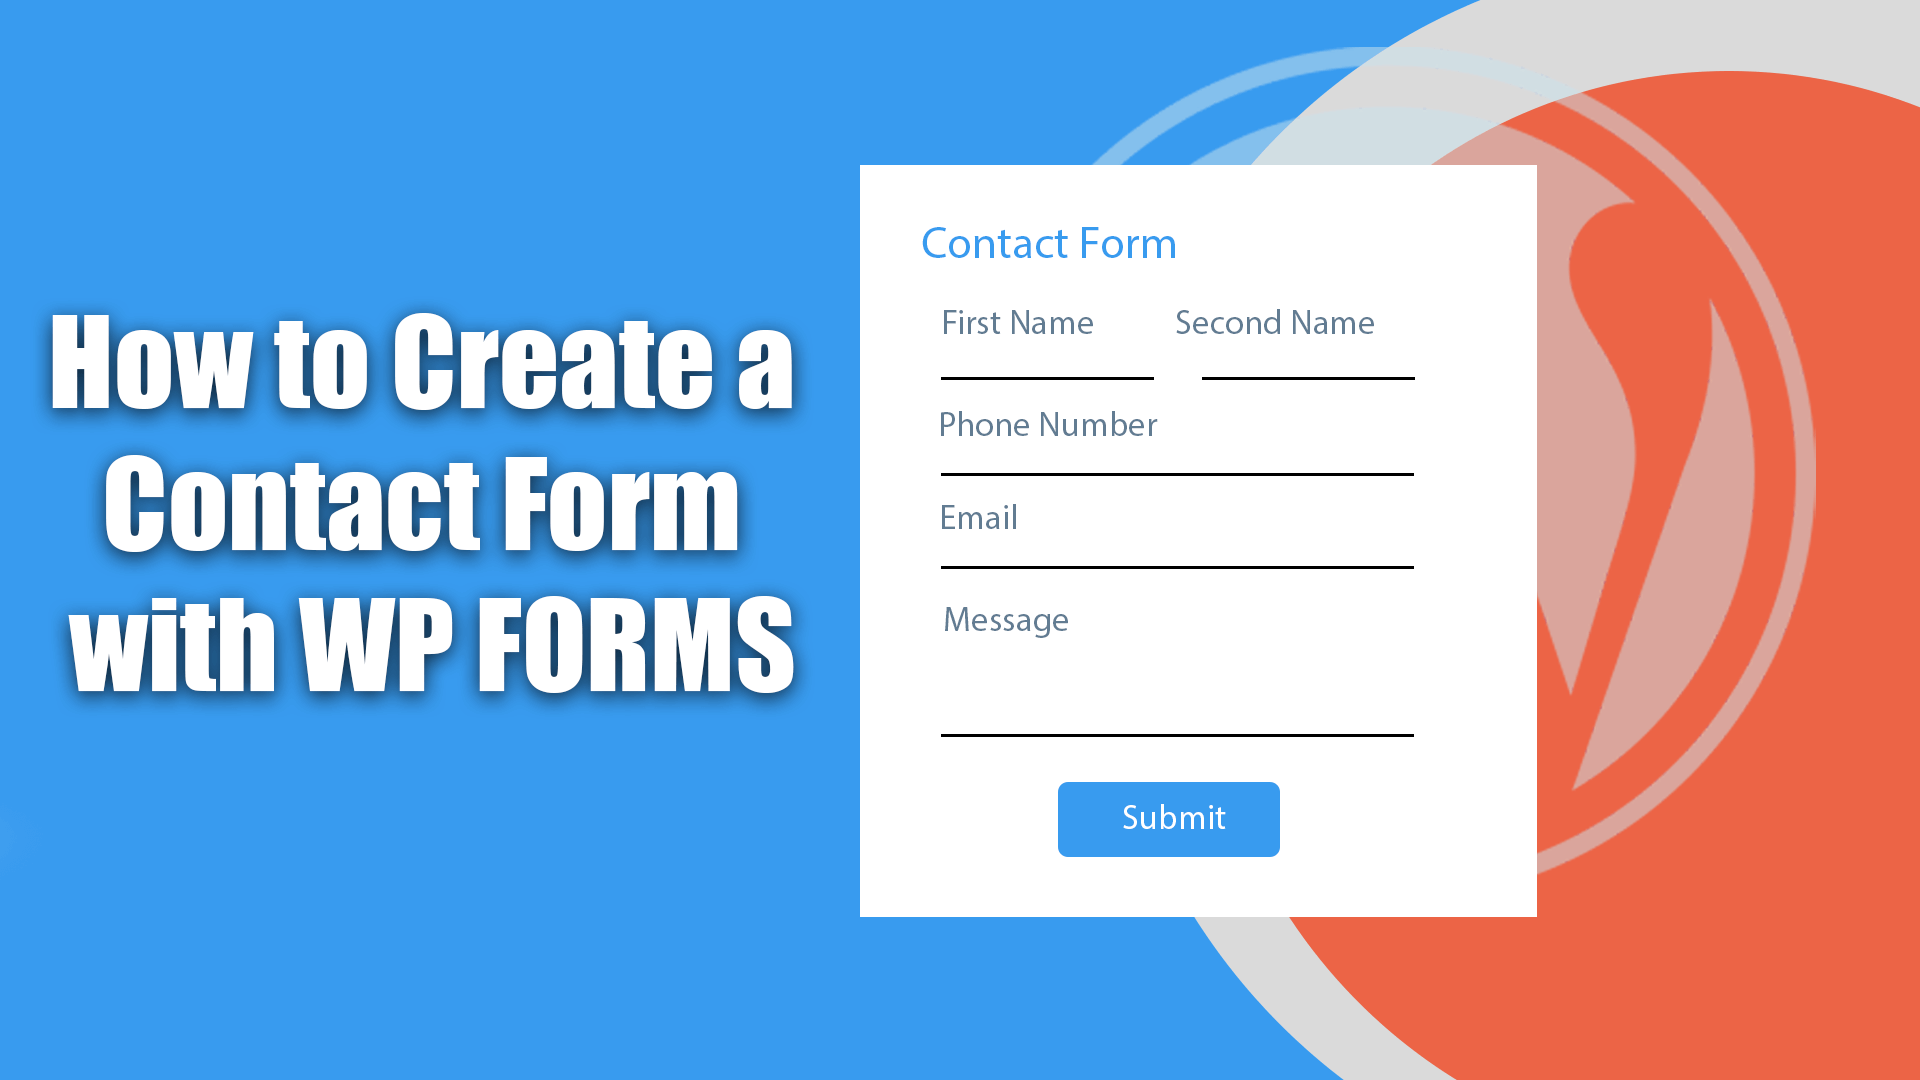 How to create a contact form with WPForms